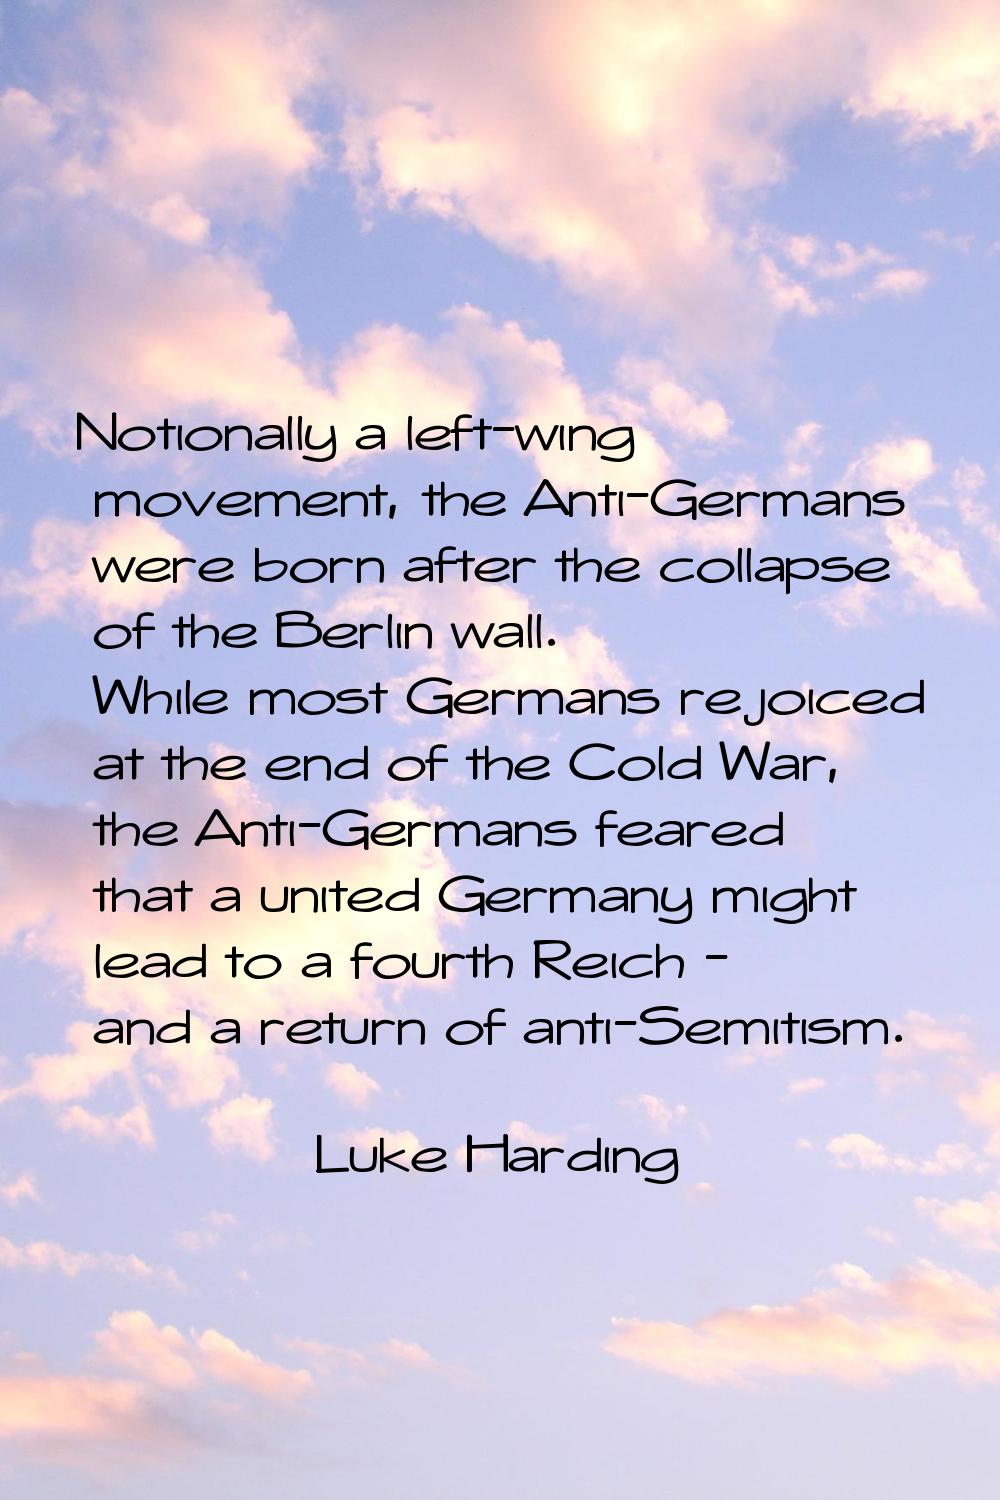 Notionally a left-wing movement, the Anti-Germans were born after the collapse of the Berlin wall. 